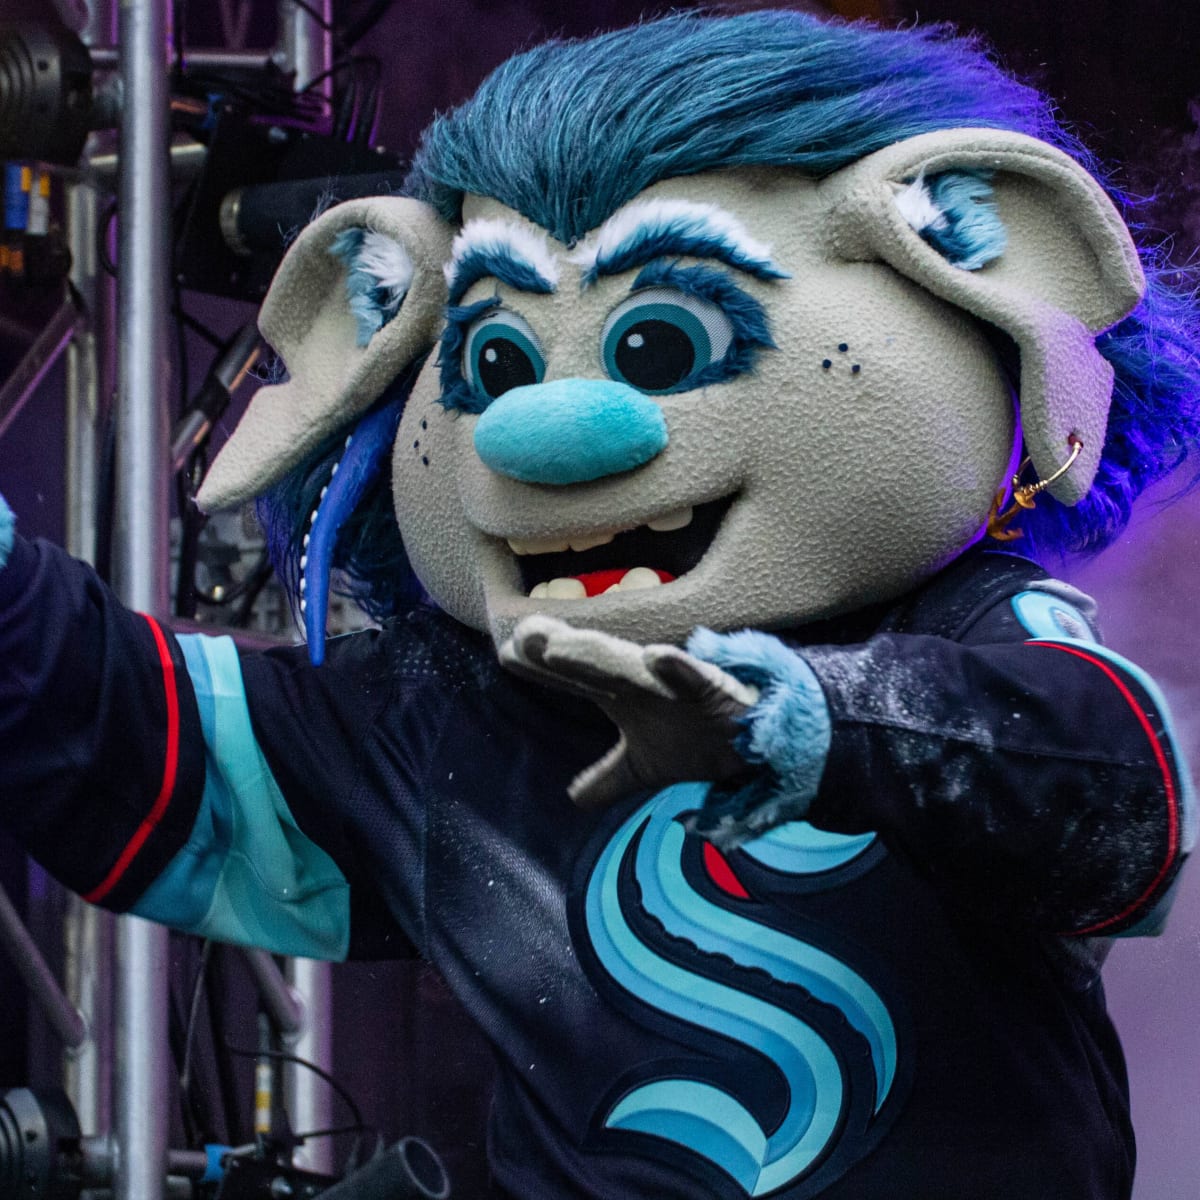 Seattle Kraken's Mascot Can Be More Than a Gimmick